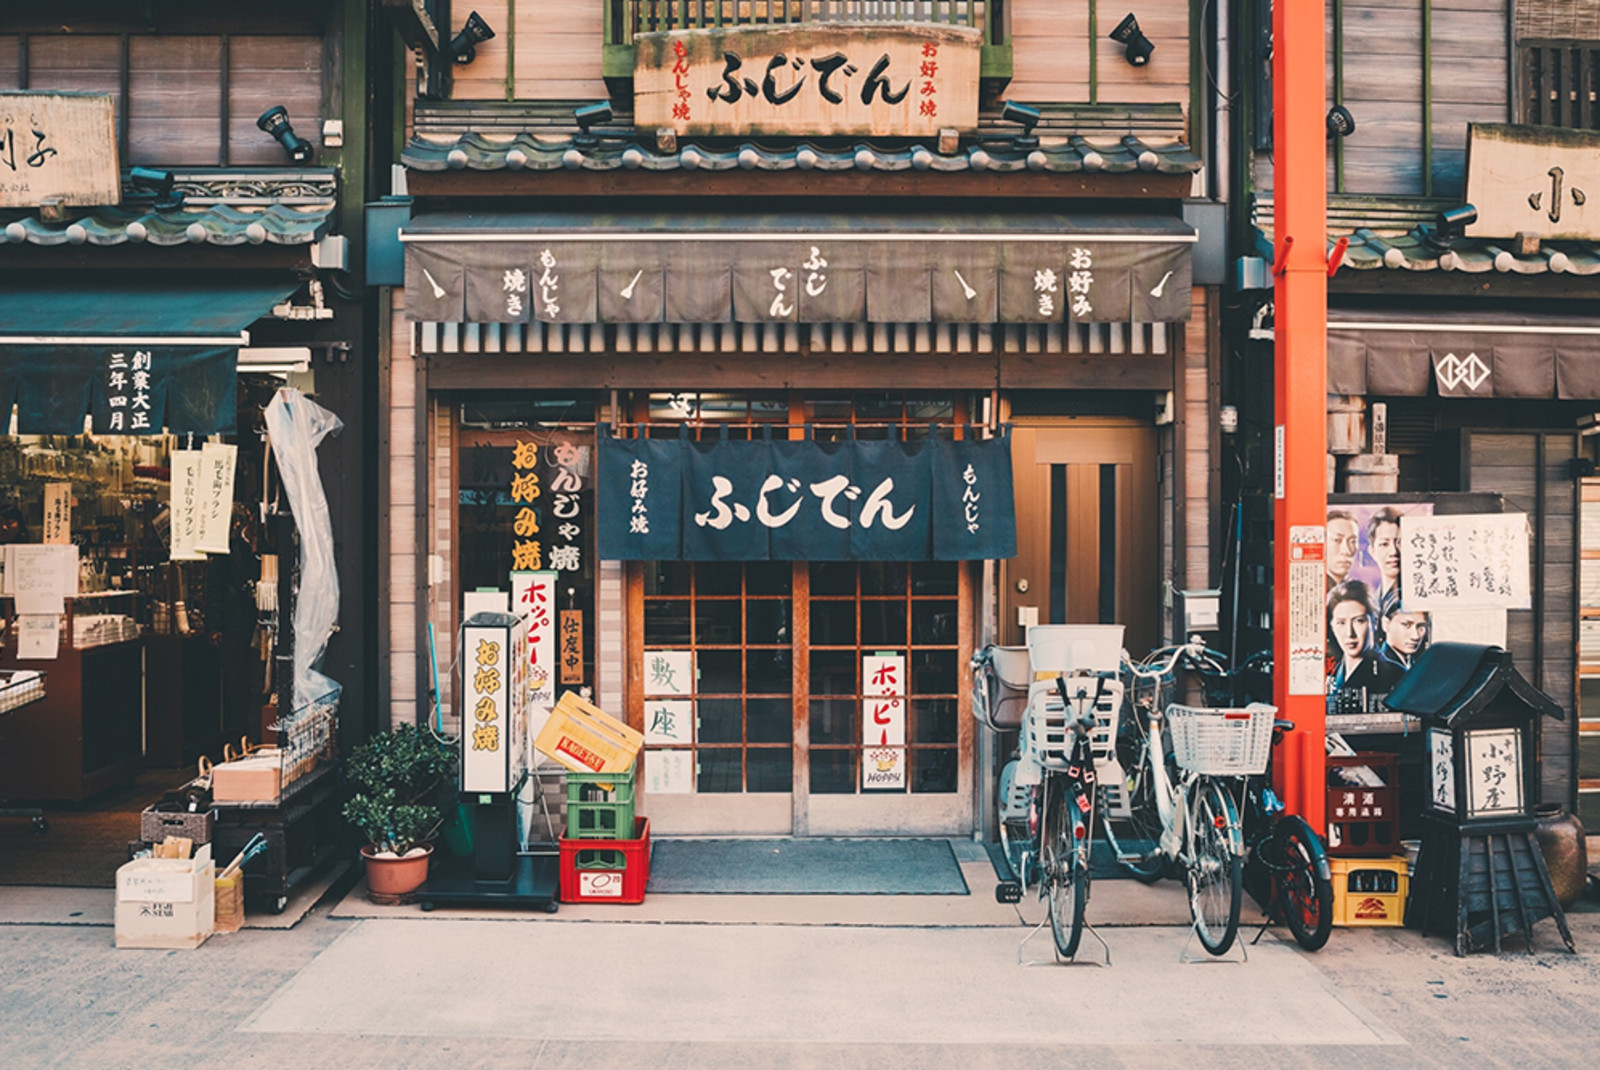 Japanese street and shops with colorful signs and characters bicycles out front